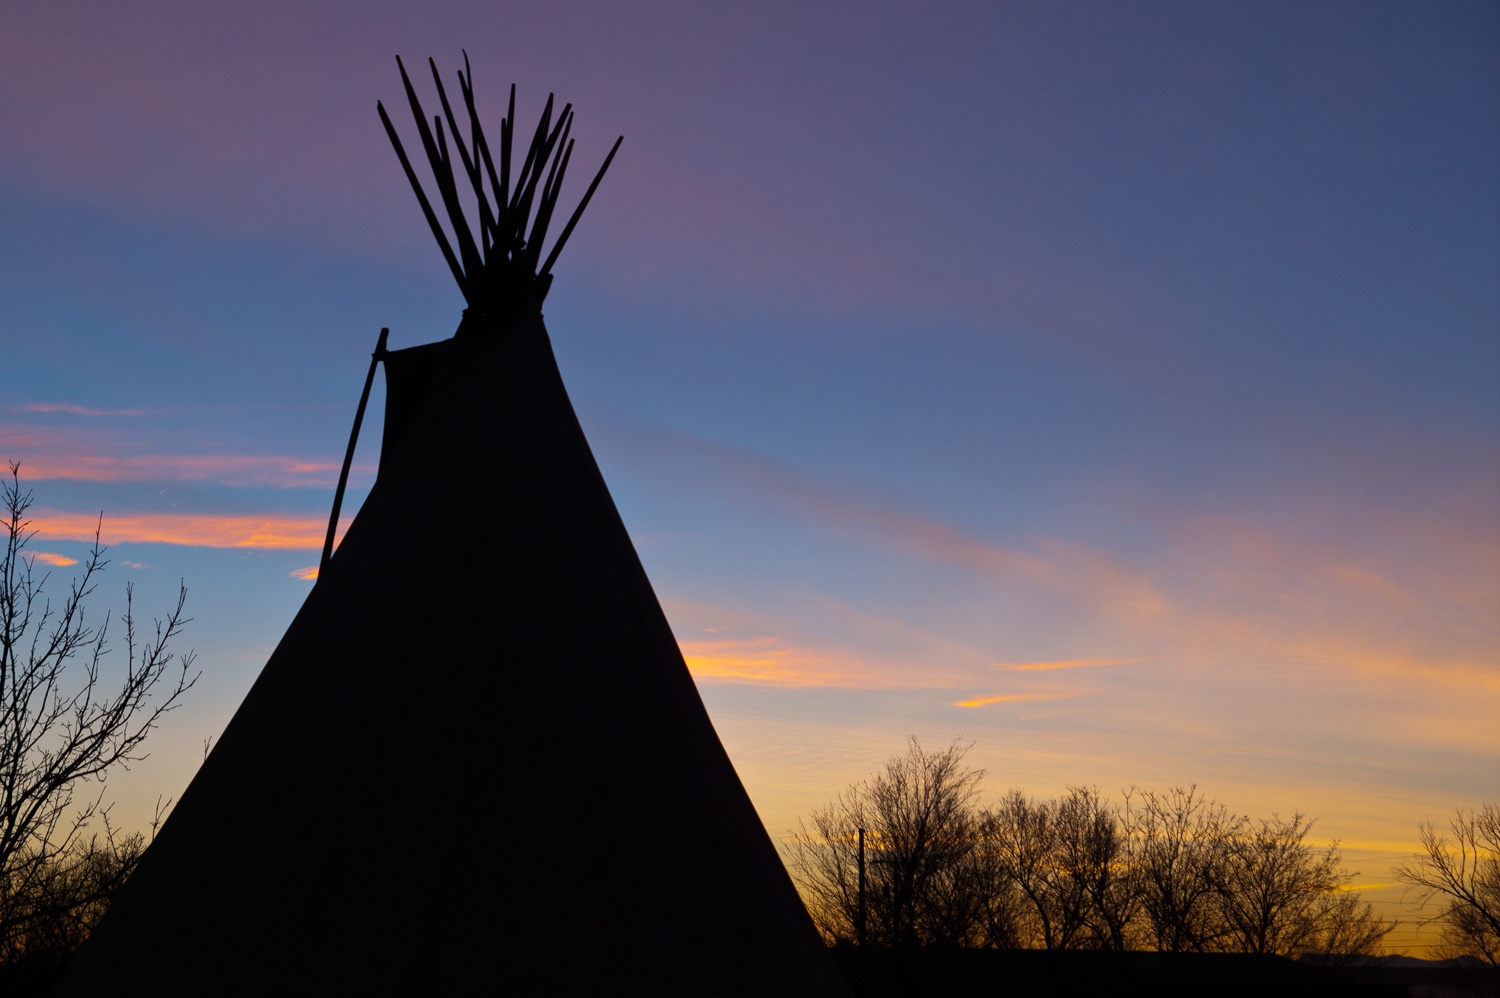 A Teepee In The Morning